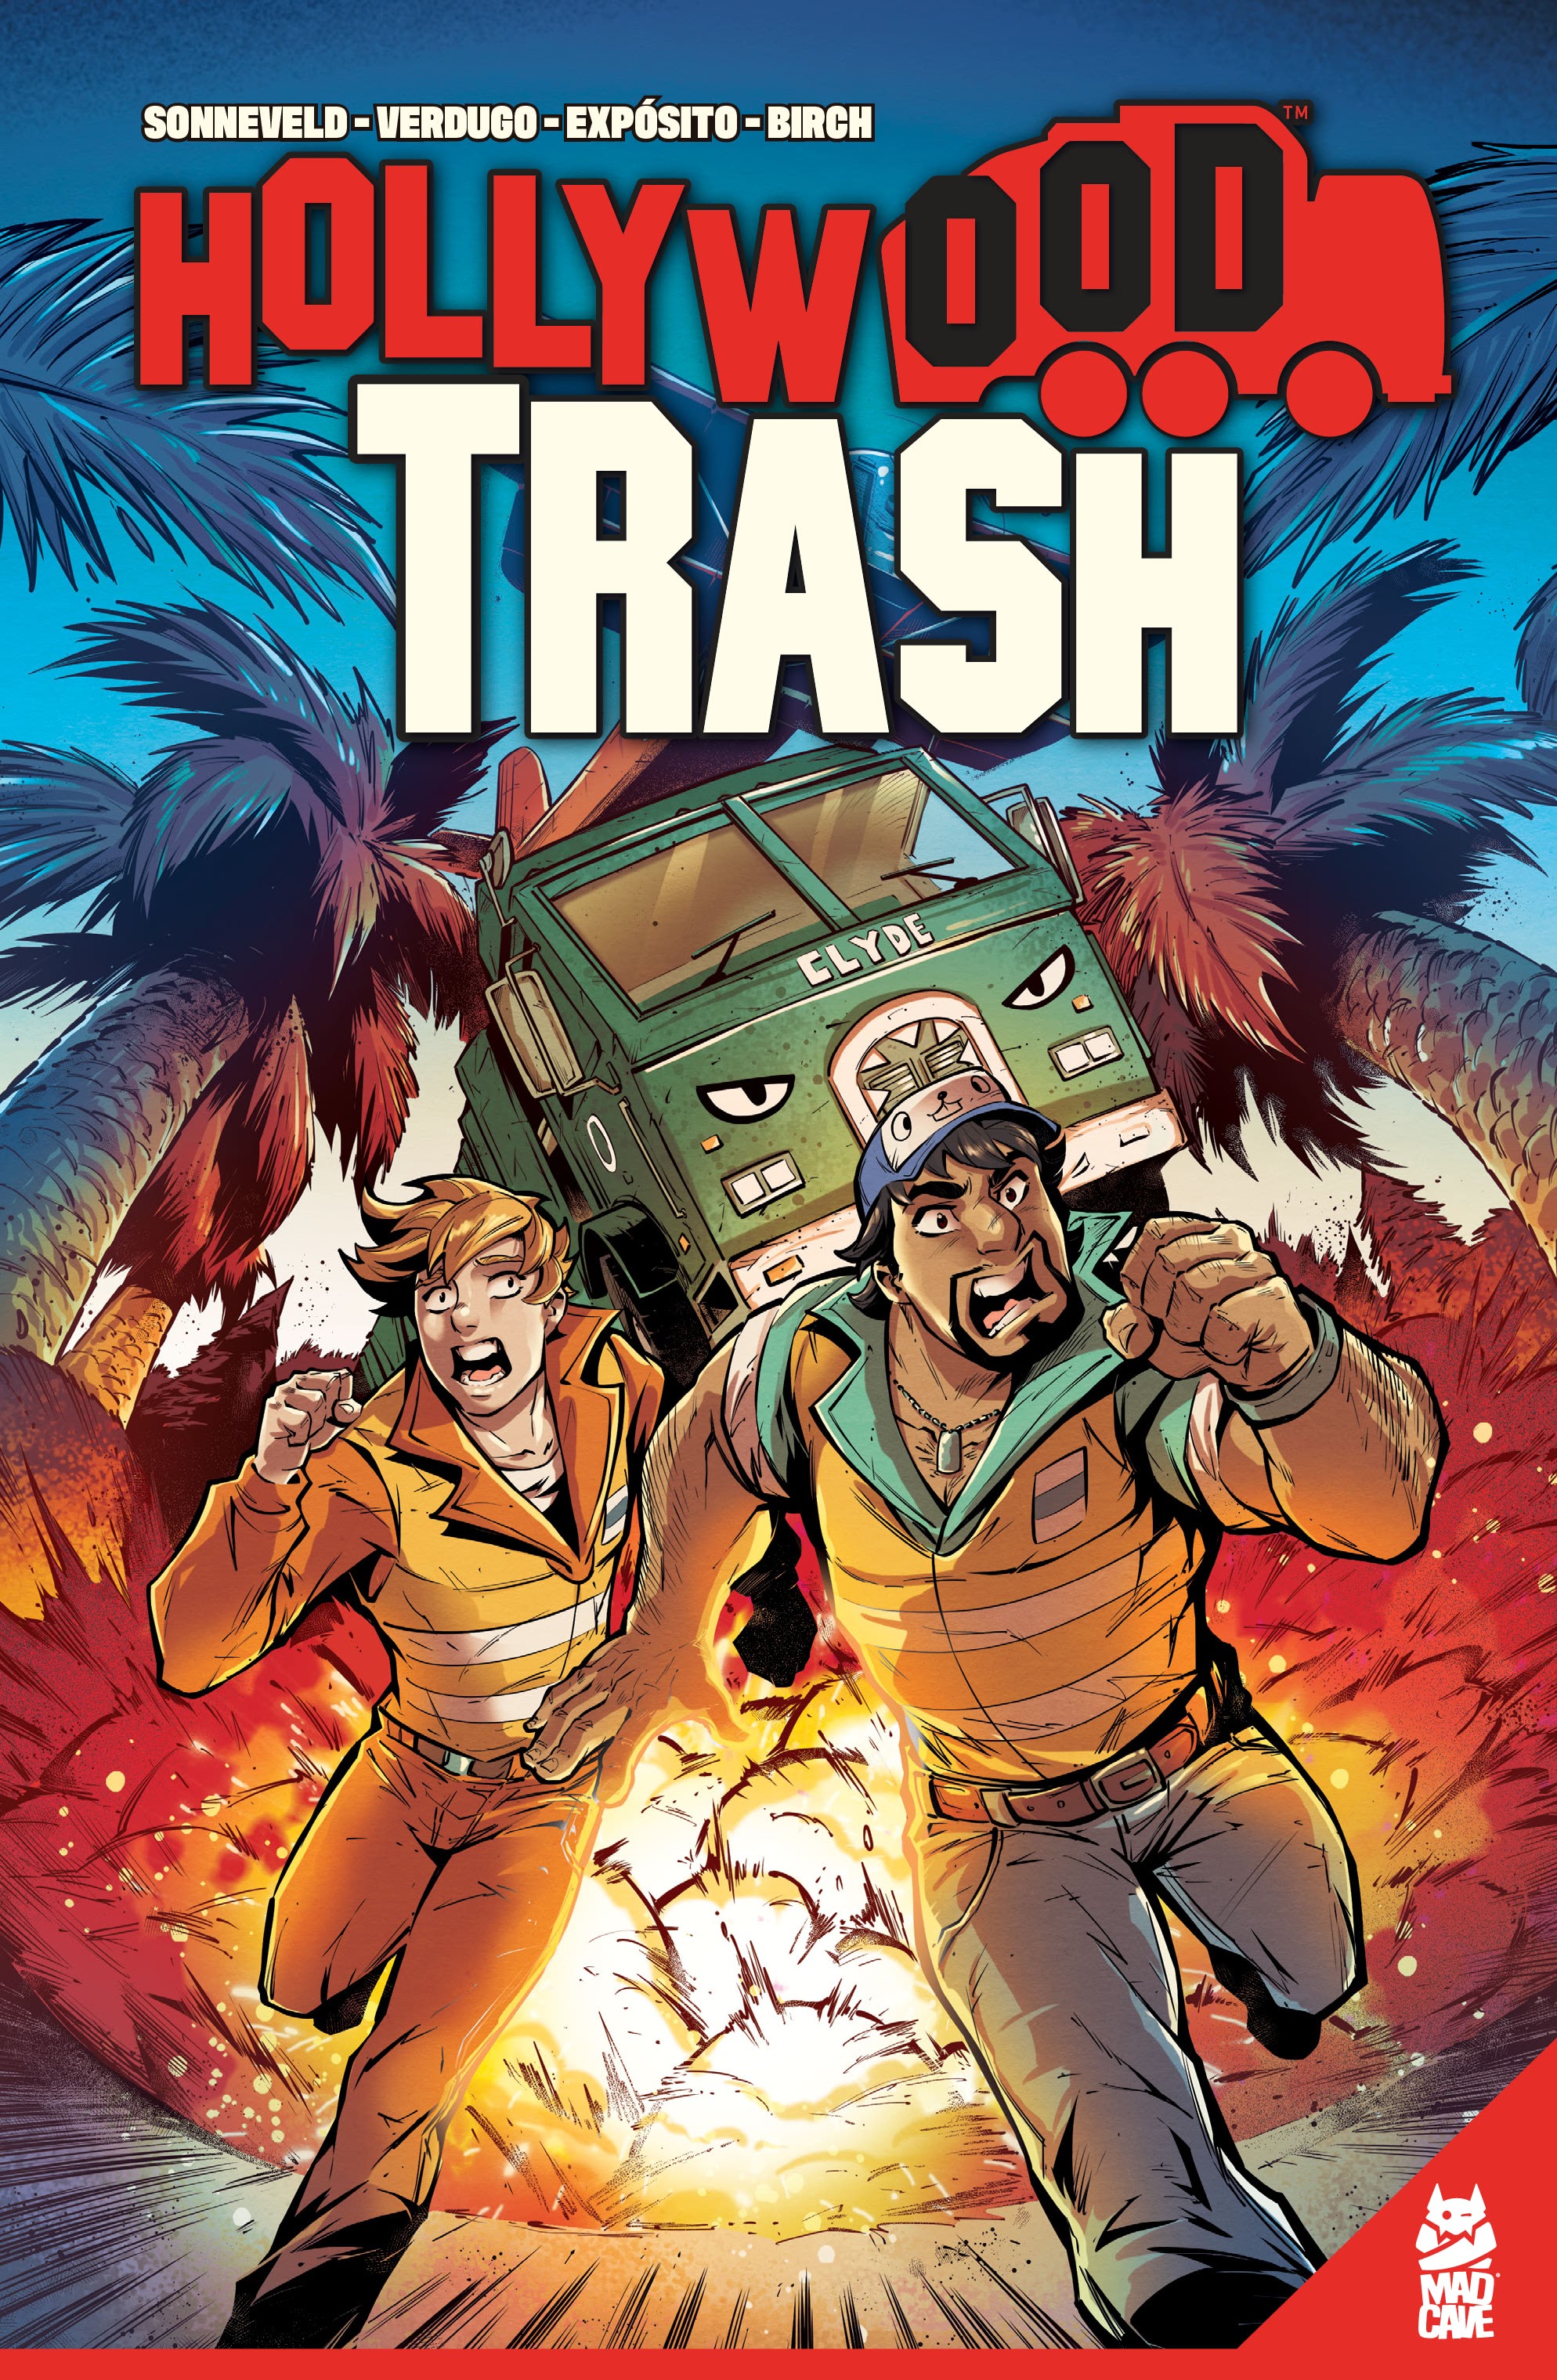 Read online Hollywood Trash comic -  Issue # TPB - 1